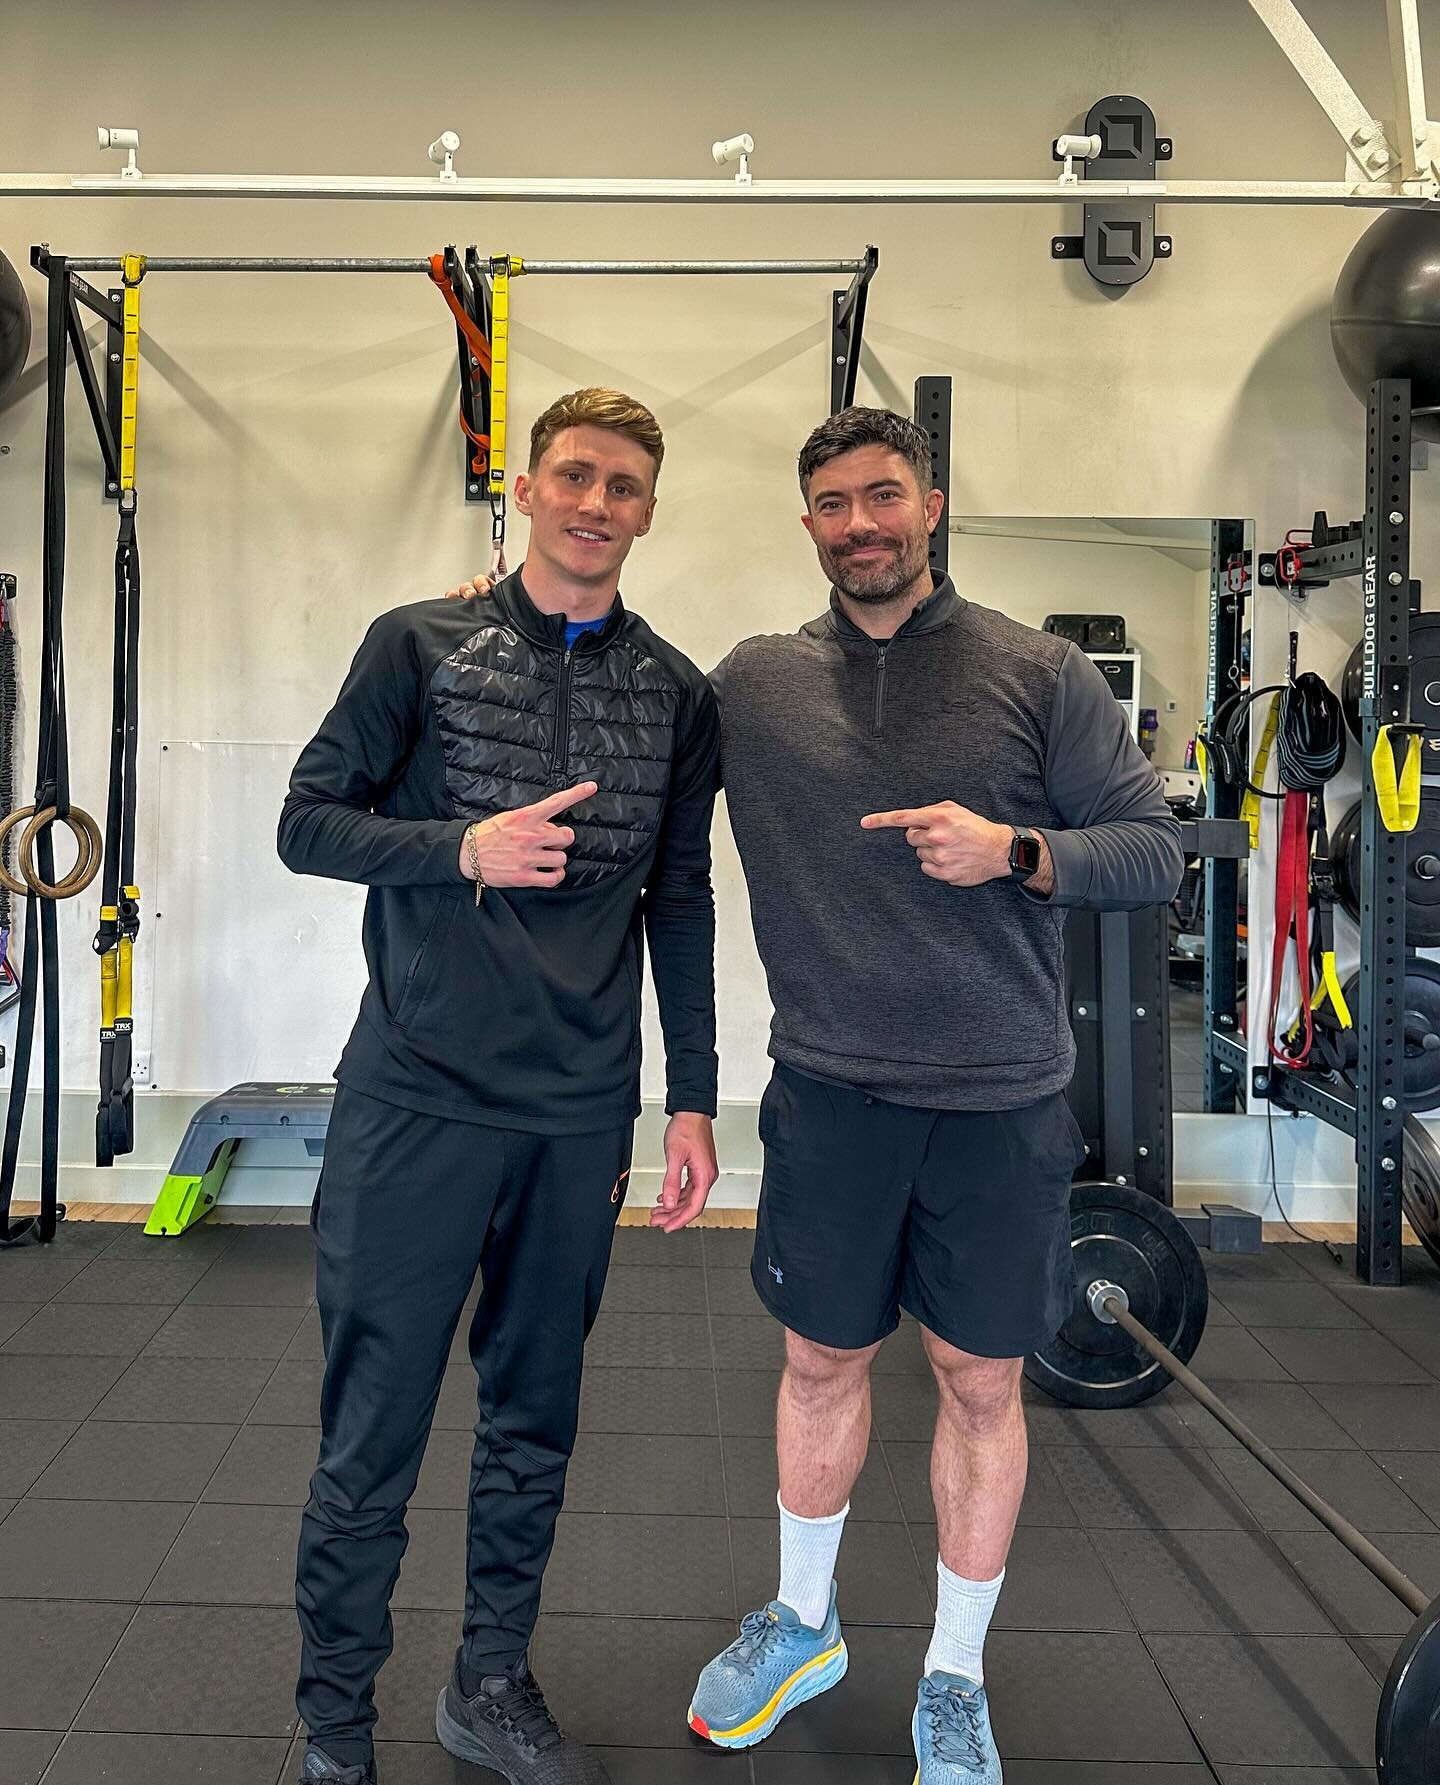 A big shout out to my client Harry.

Harry started training with me last year to get some extra training in around his football to build up his strength and improve his confidence on the football pitch where he played twice in league 1 and cup games 